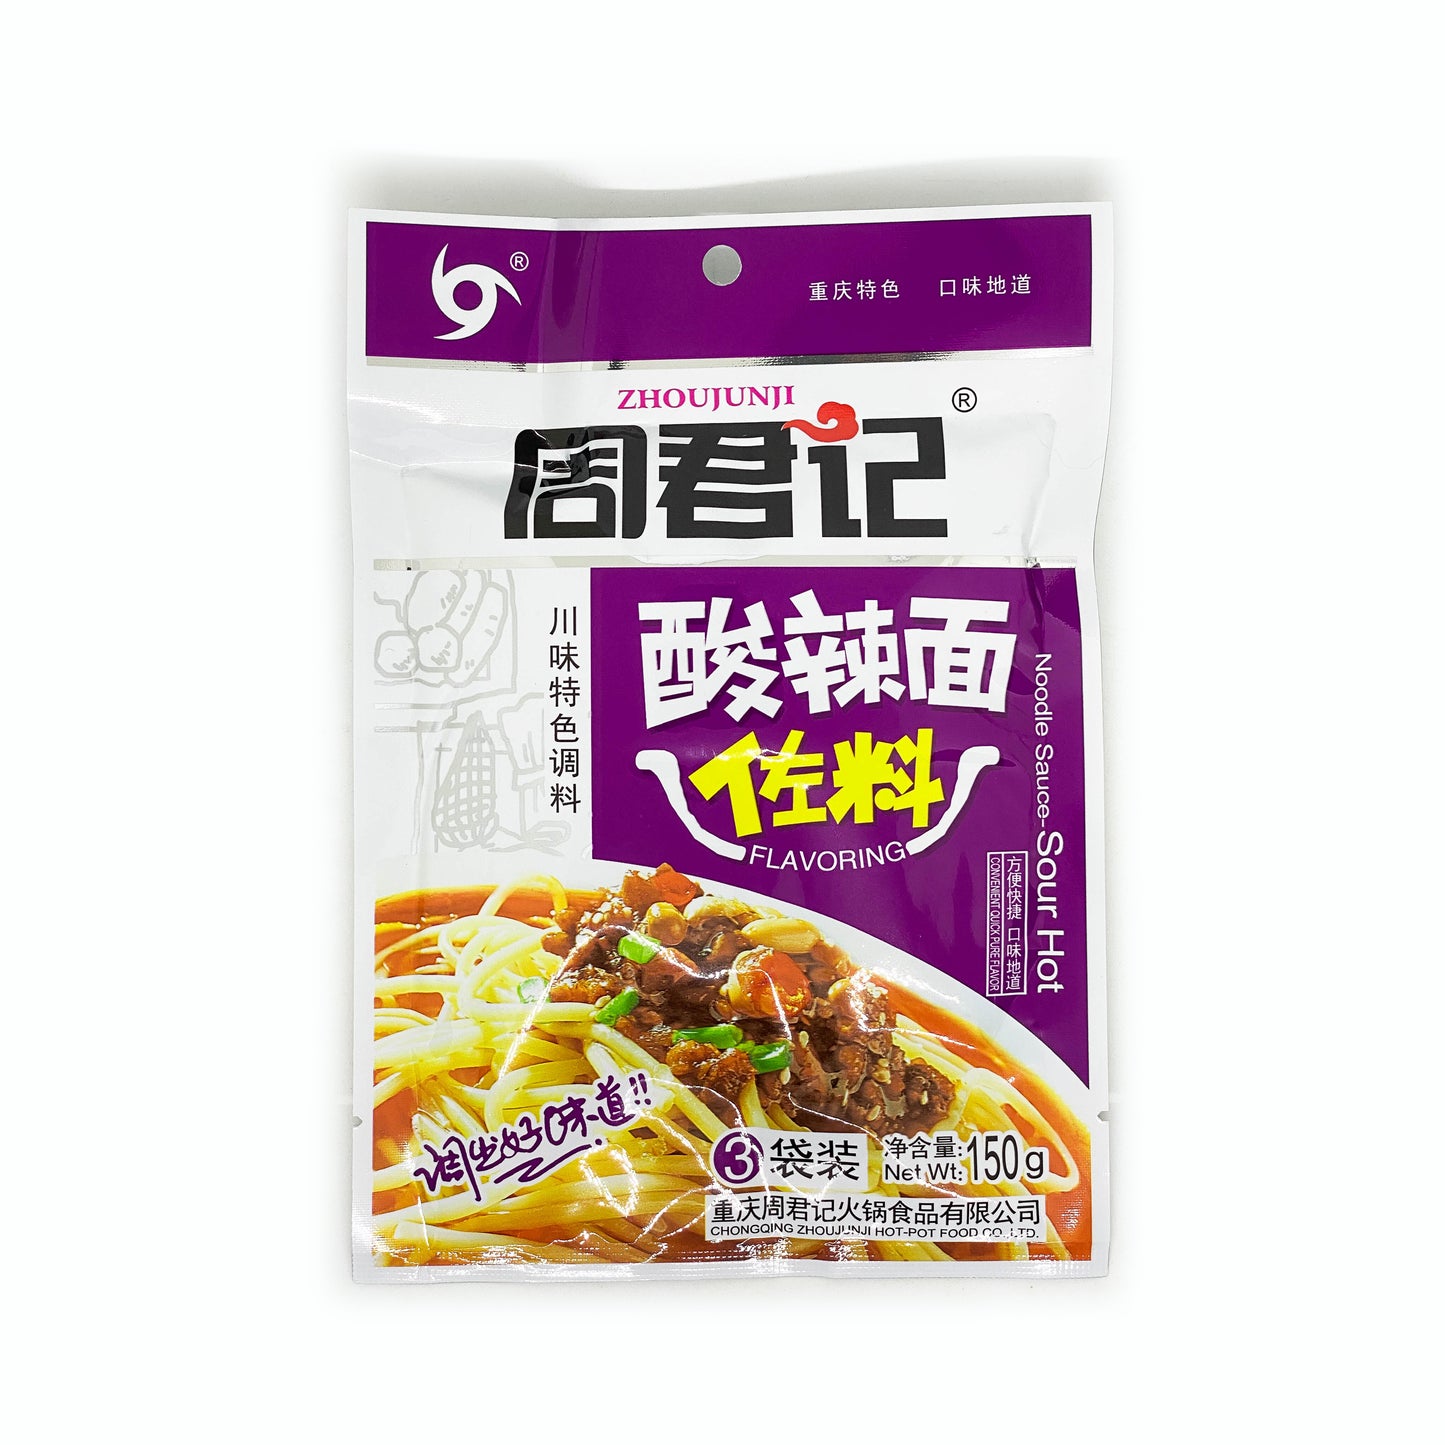 Noodle Sauce - Spicy & Sour 周君記 酸辣麵佐料